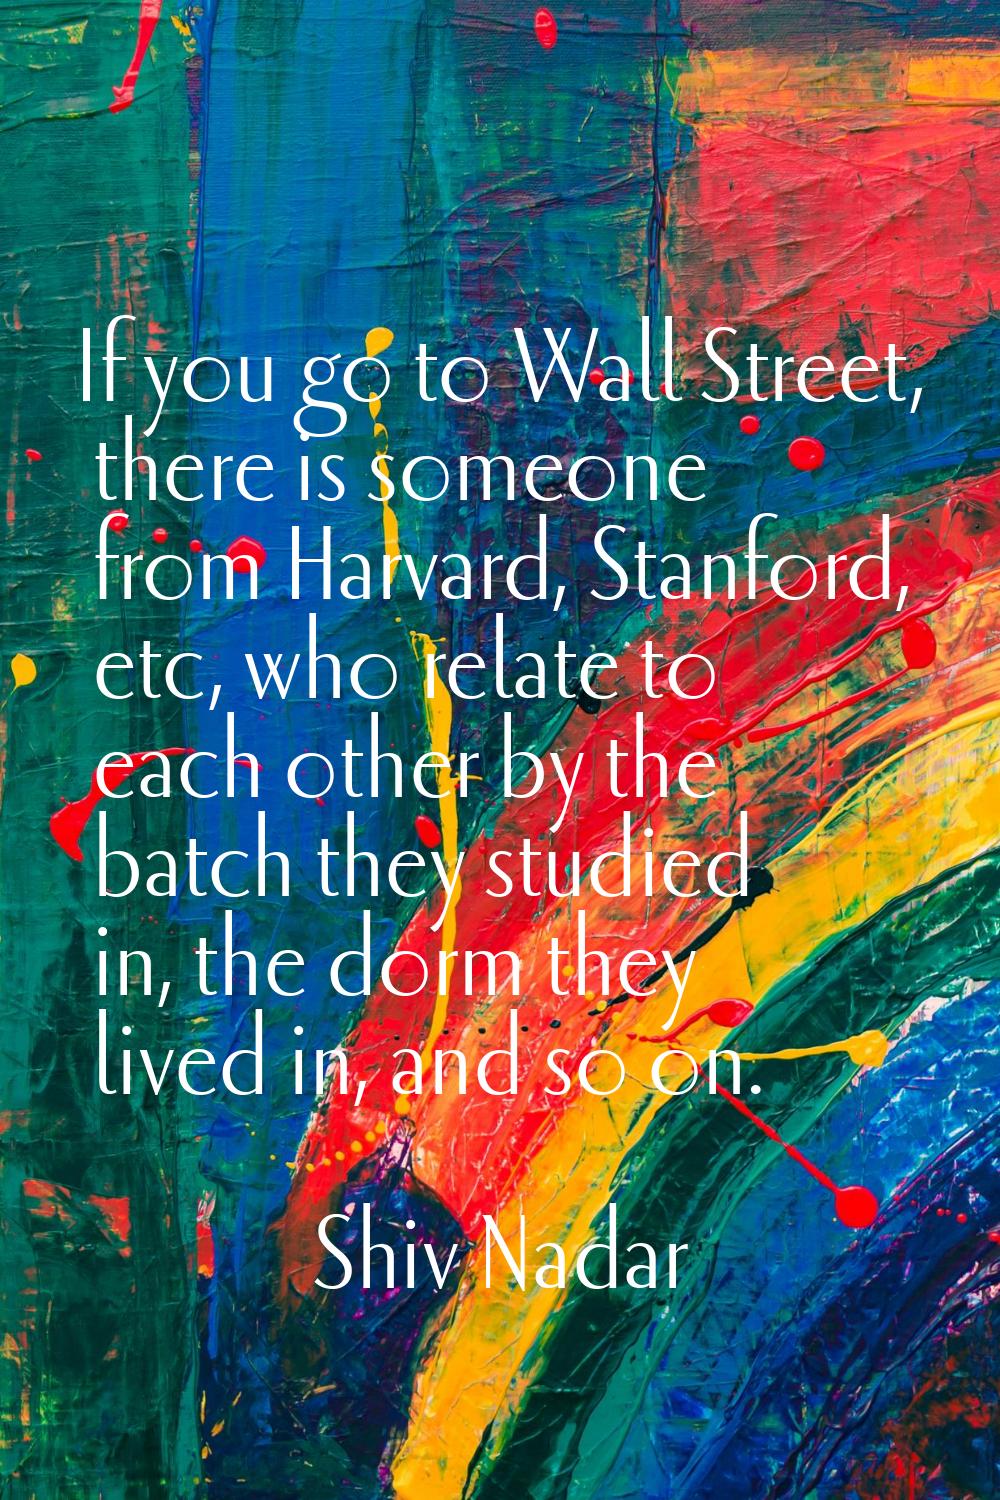 If you go to Wall Street, there is someone from Harvard, Stanford, etc, who relate to each other by